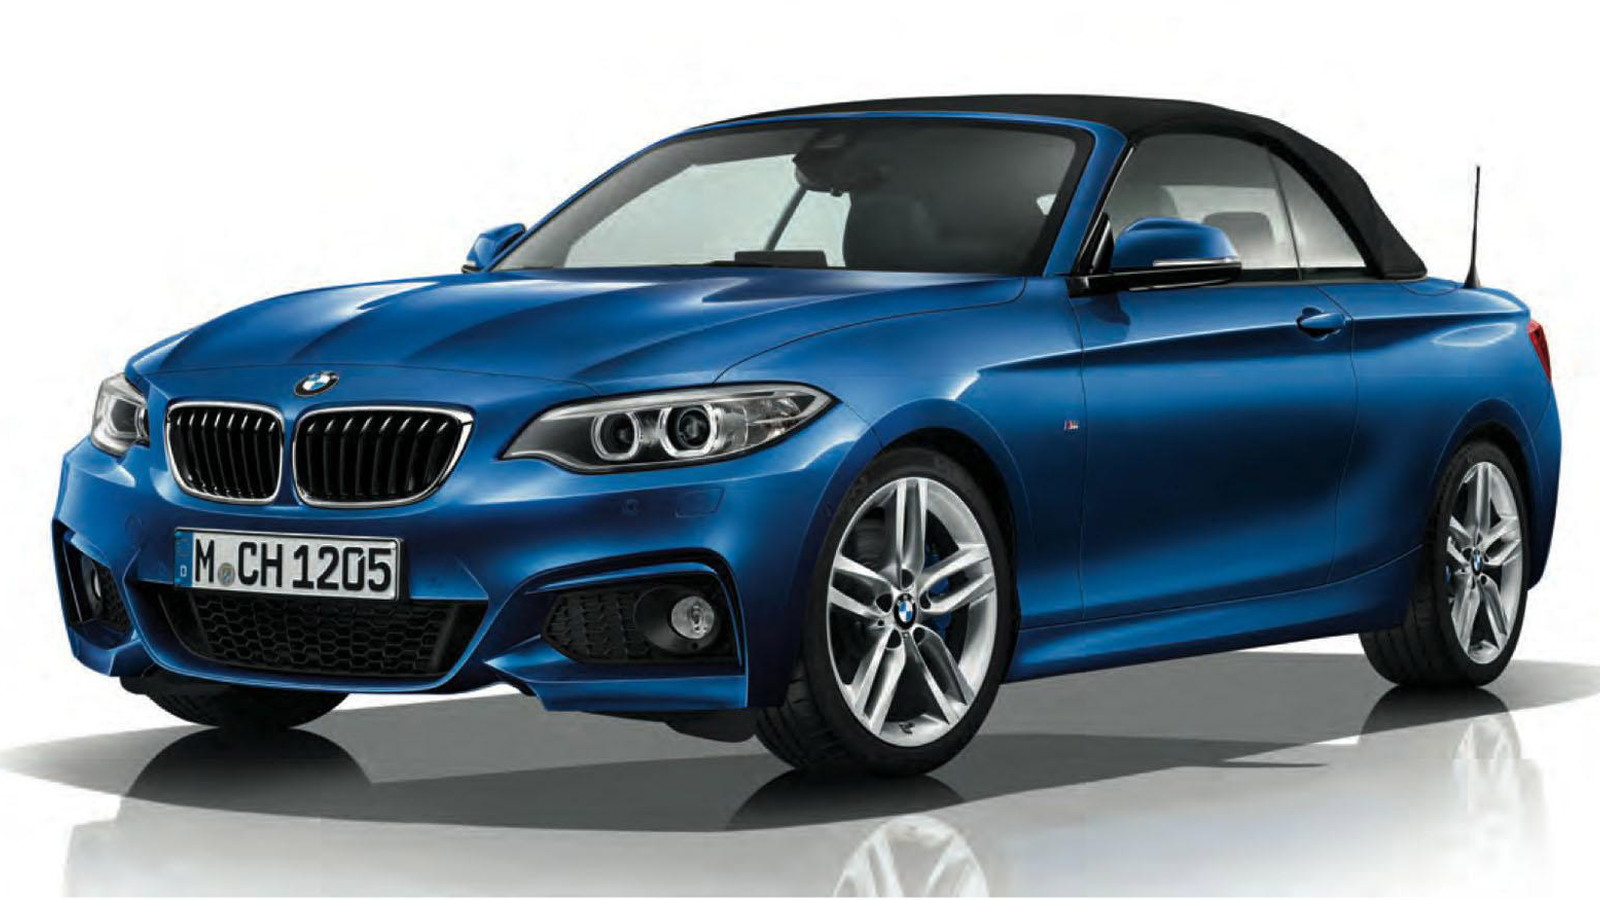 2015 BMW 2-Series Convertible equipped with M Sport package